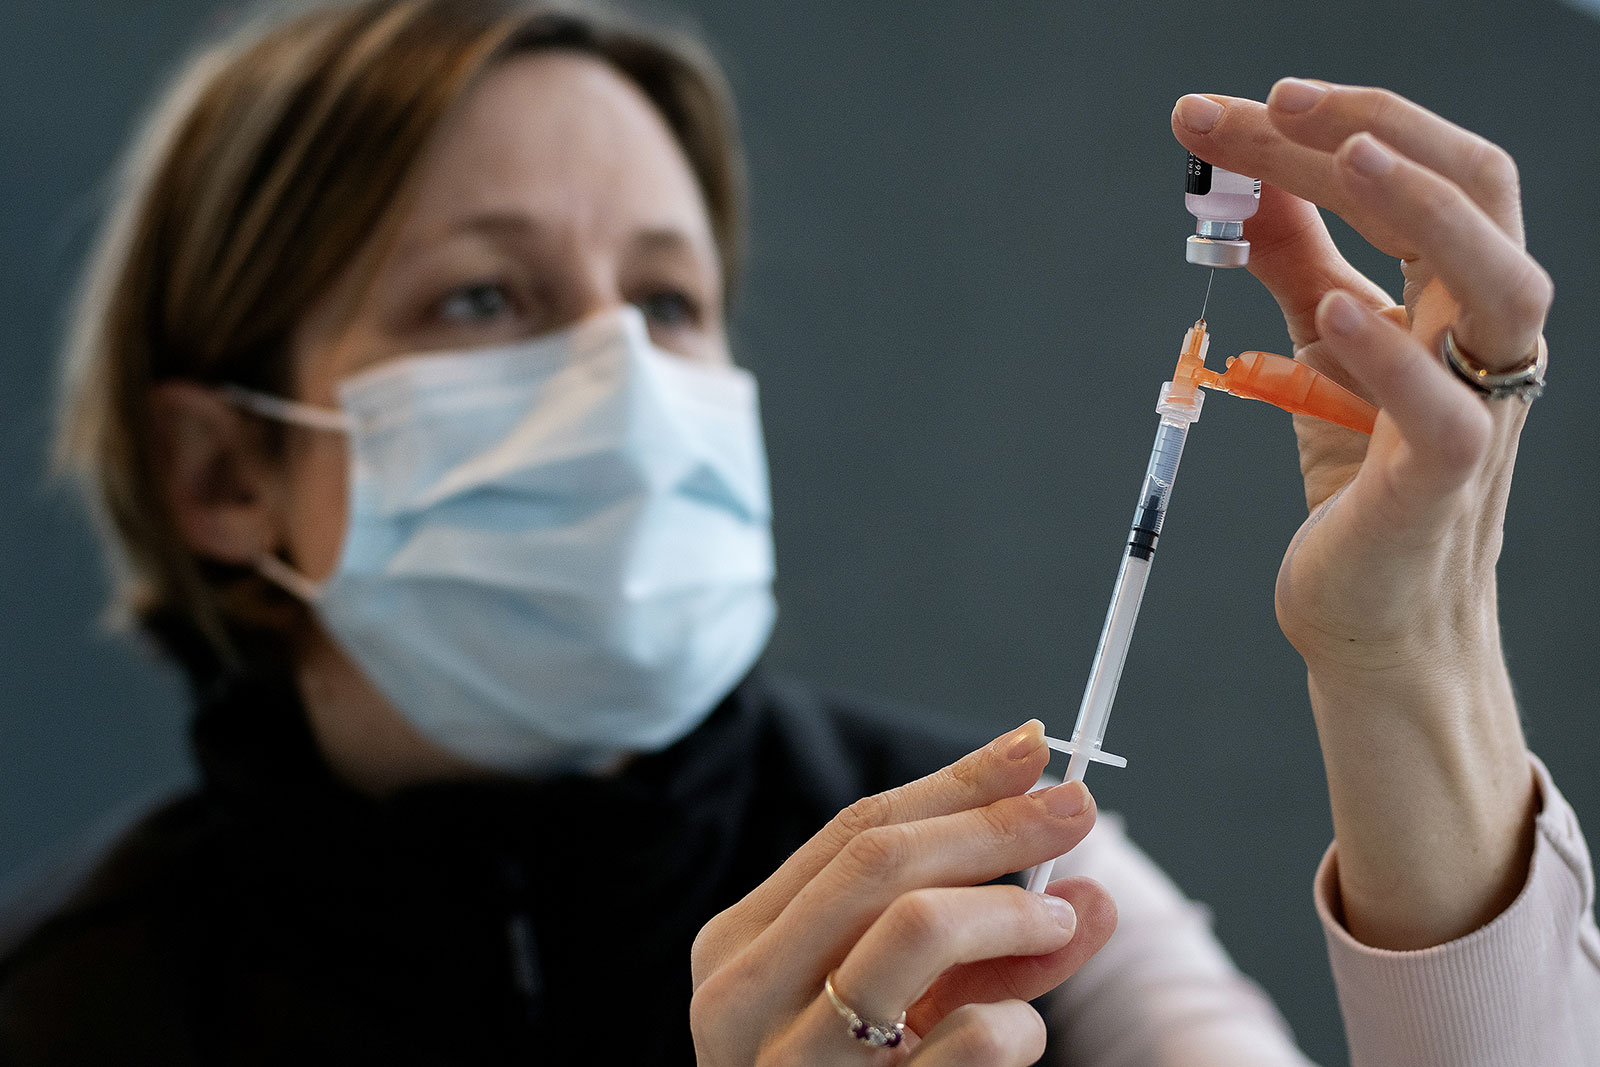 A healthcare worker fills a syringe with the Pfizer-BioNTech Covid-19 vaccine at a vaccination clinic in Vancouver, Canada, on Thursday, March 4. Canada announced Wednesday that it has approved the Pfizer-BioNTech Covid-19 vaccine for children ages 12 to 15.